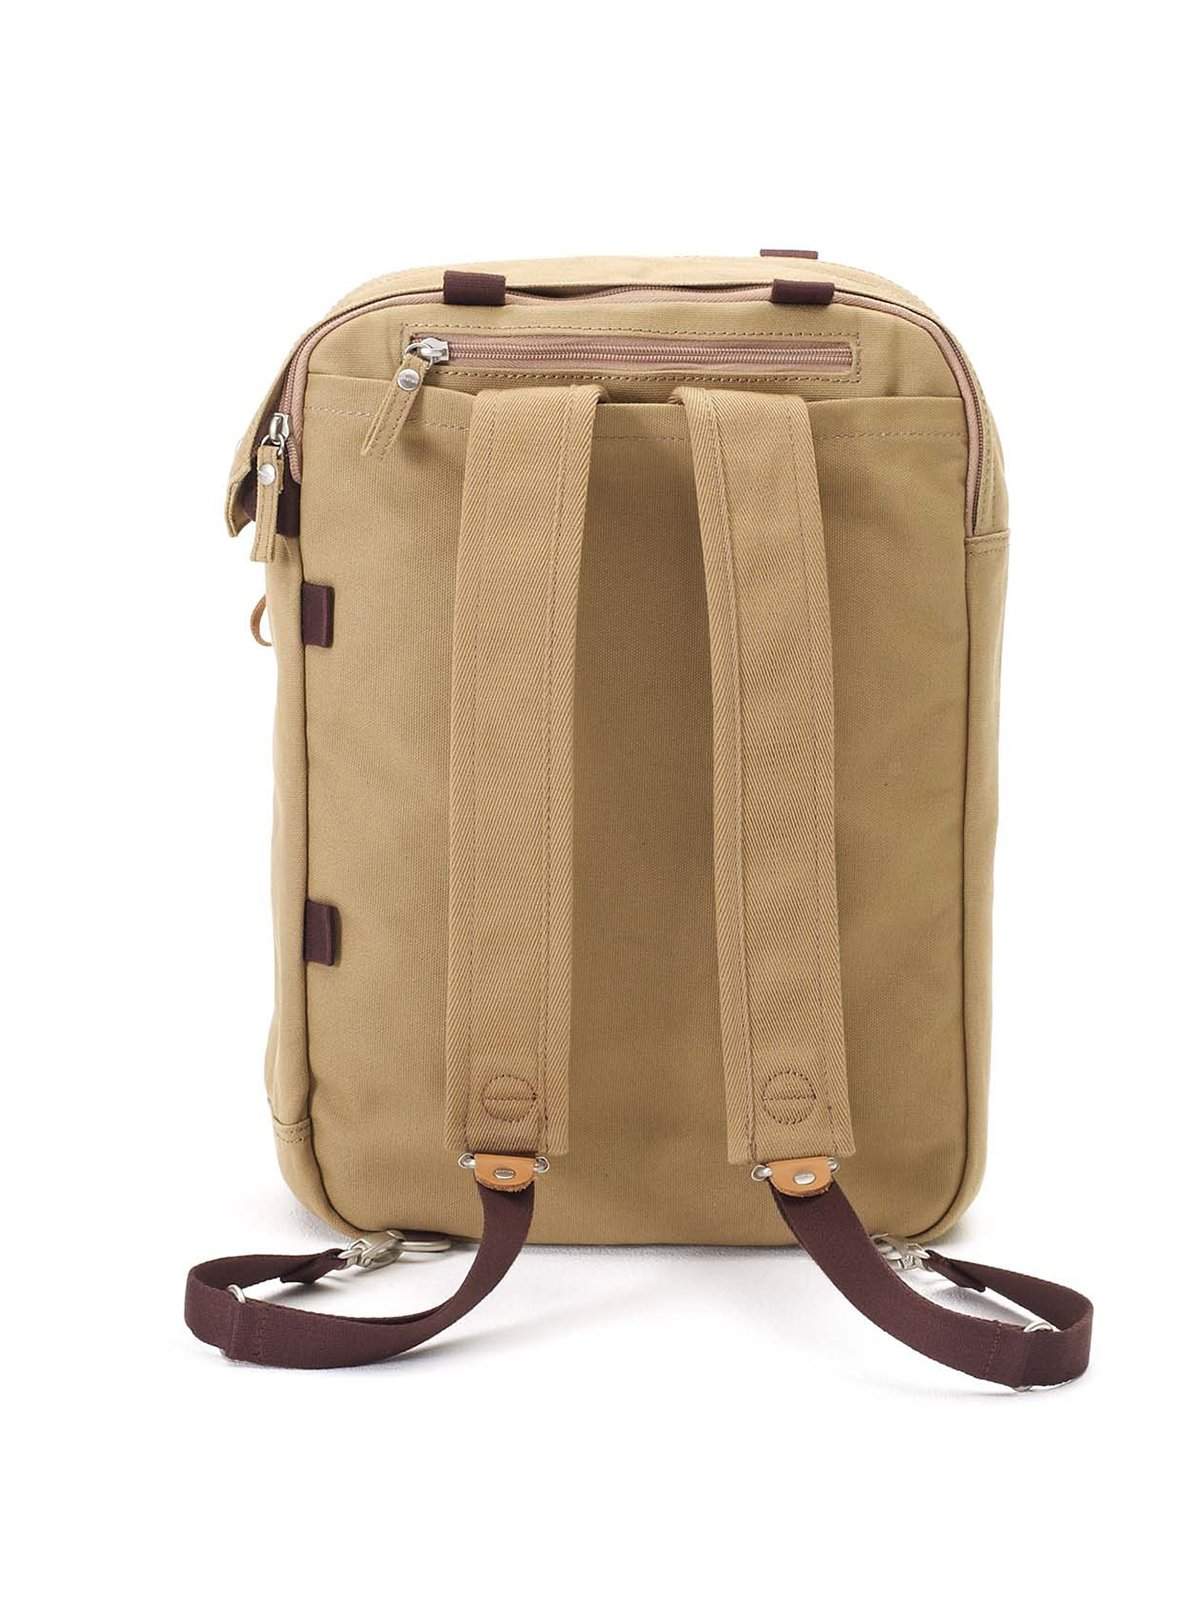 Qwstion Daypack Organic Camel - MORE by Morello Indonesia